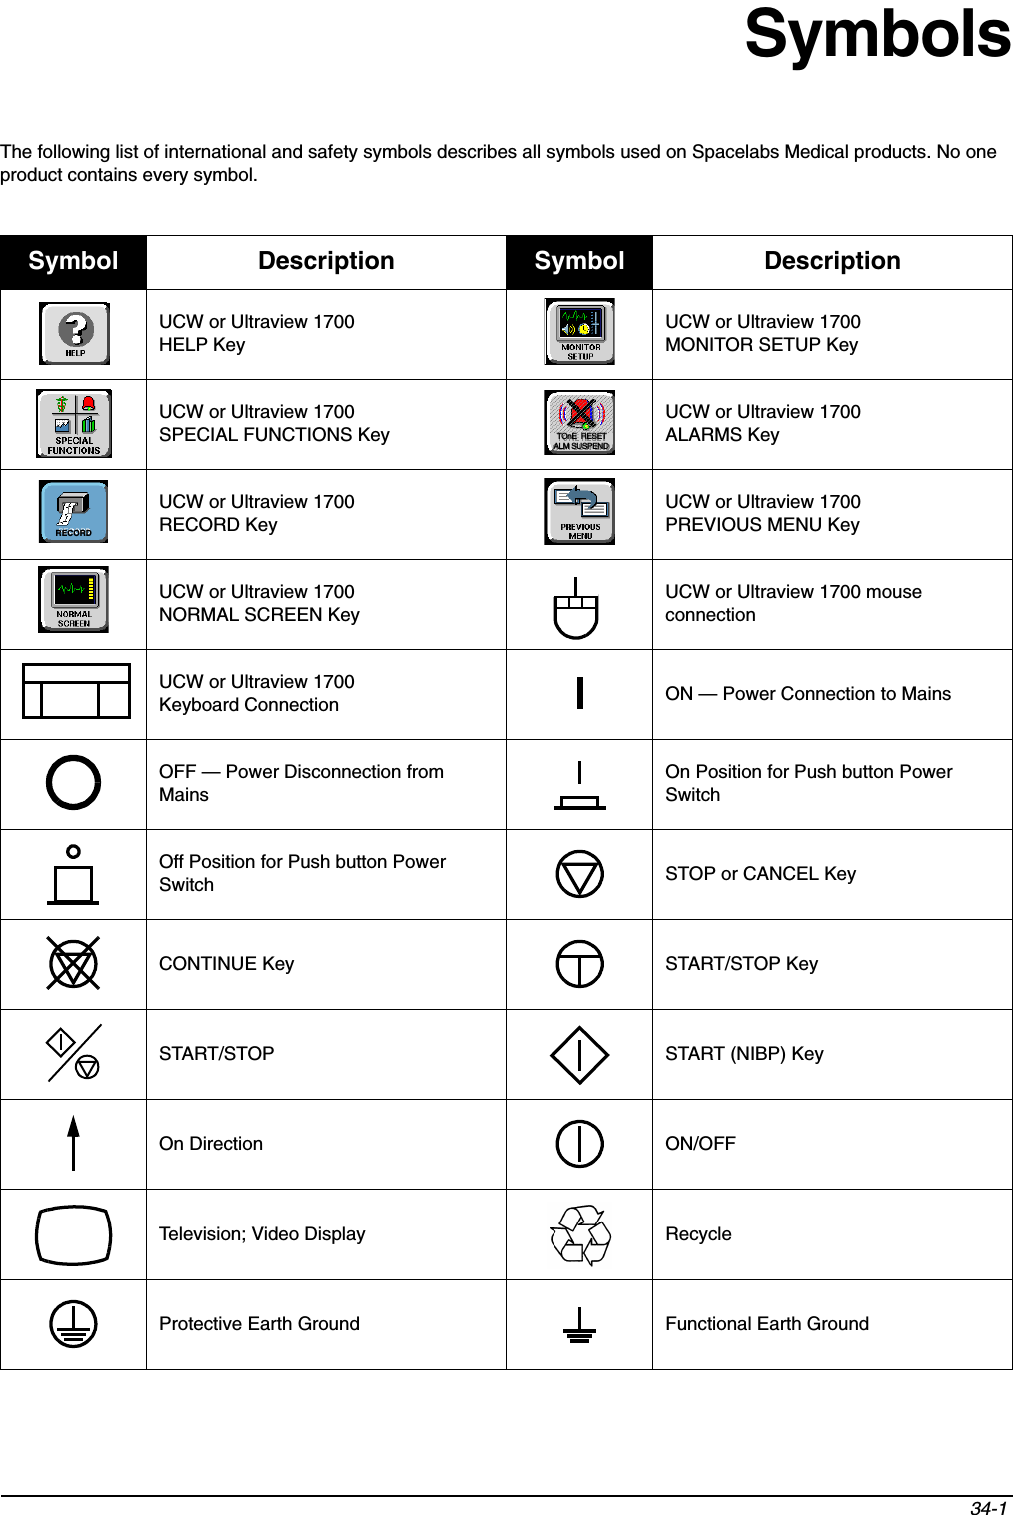 34-1SymbolsThe following list of international and safety symbols describes all symbols used on Spacelabs Medical products. No one product contains every symbol.Symbol Description Symbol DescriptionUCW or Ultraview 1700 HELP KeyUCW or Ultraview 1700 MONITOR SETUP KeyUCW or Ultraview 1700 SPECIAL FUNCTIONS KeyUCW or Ultraview 1700 ALARMS KeyUCW or Ultraview 1700 RECORD KeyUCW or Ultraview 1700 PREVIOUS MENU KeyUCW or Ultraview 1700 NORMAL SCREEN KeyUCW or Ultraview 1700 mouse connectionUCW or Ultraview 1700 Keyboard Connection ON — Power Connection to MainsOFF — Power Disconnection from MainsOn Position for Push button Power SwitchOff Position for Push button Power Switch STOP or CANCEL KeyCONTINUE Key START/STOP KeySTART/STOP  START (NIBP) KeyOn Direction ON/OFF Television; Video Display RecycleProtective Earth Ground Functional Earth GroundTOnE RESETALM SUSPENDRECORD